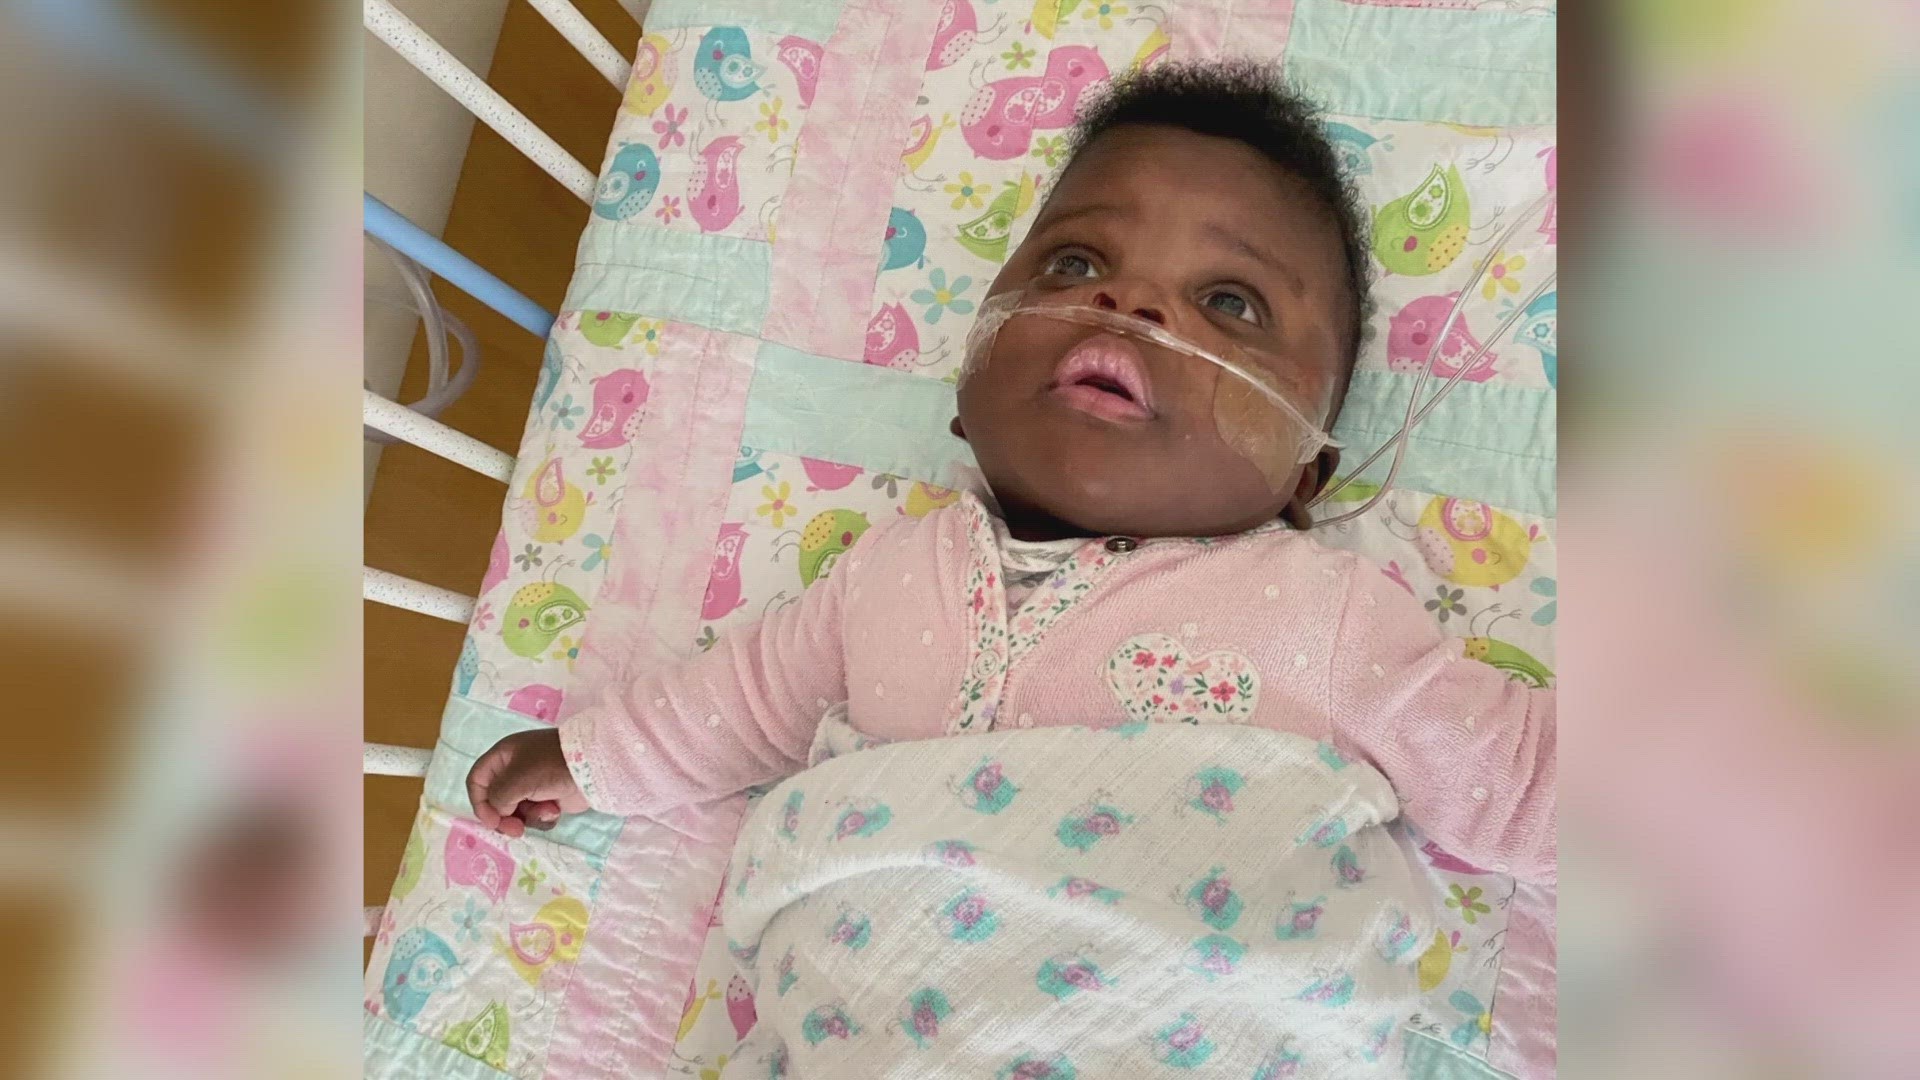 She was born in July, when her mother was only 22 weeks pregnant. At the time, she weighed just 1 pound, 2 ounces. She spent more than seven months at a hospital.